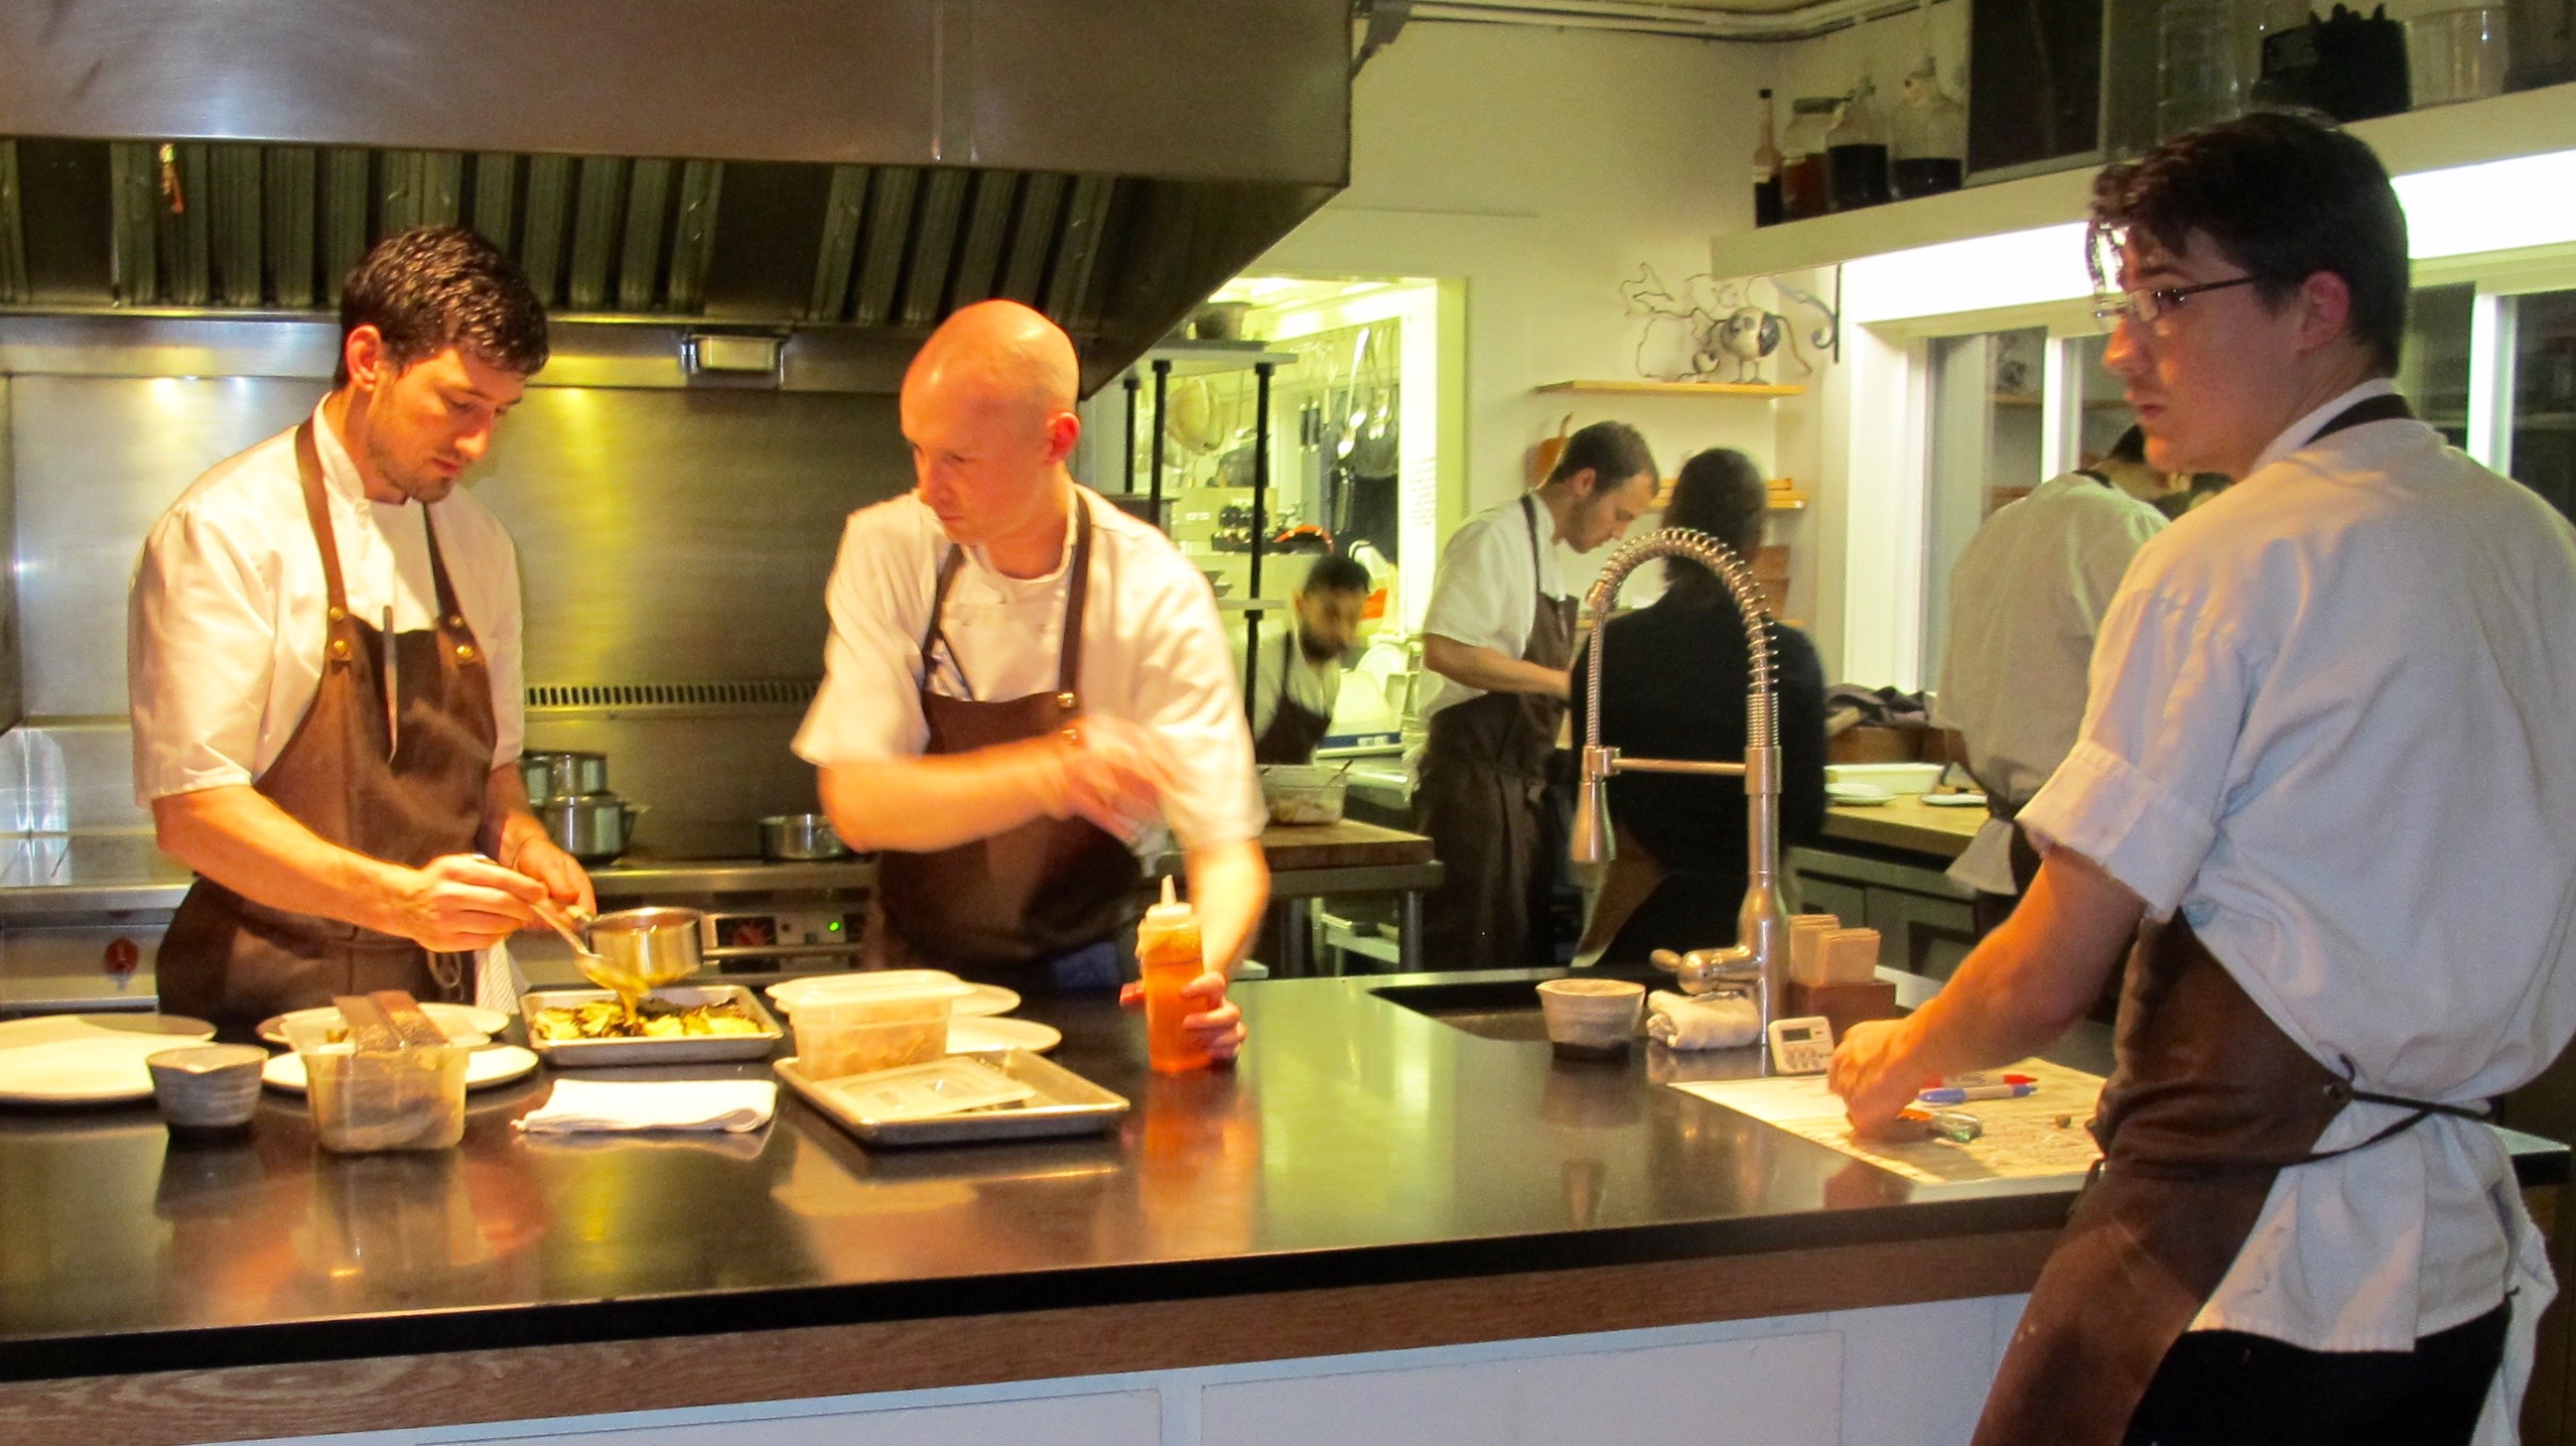 Chef Wetzel works with his crew to plate. Photo by Marla Norman.